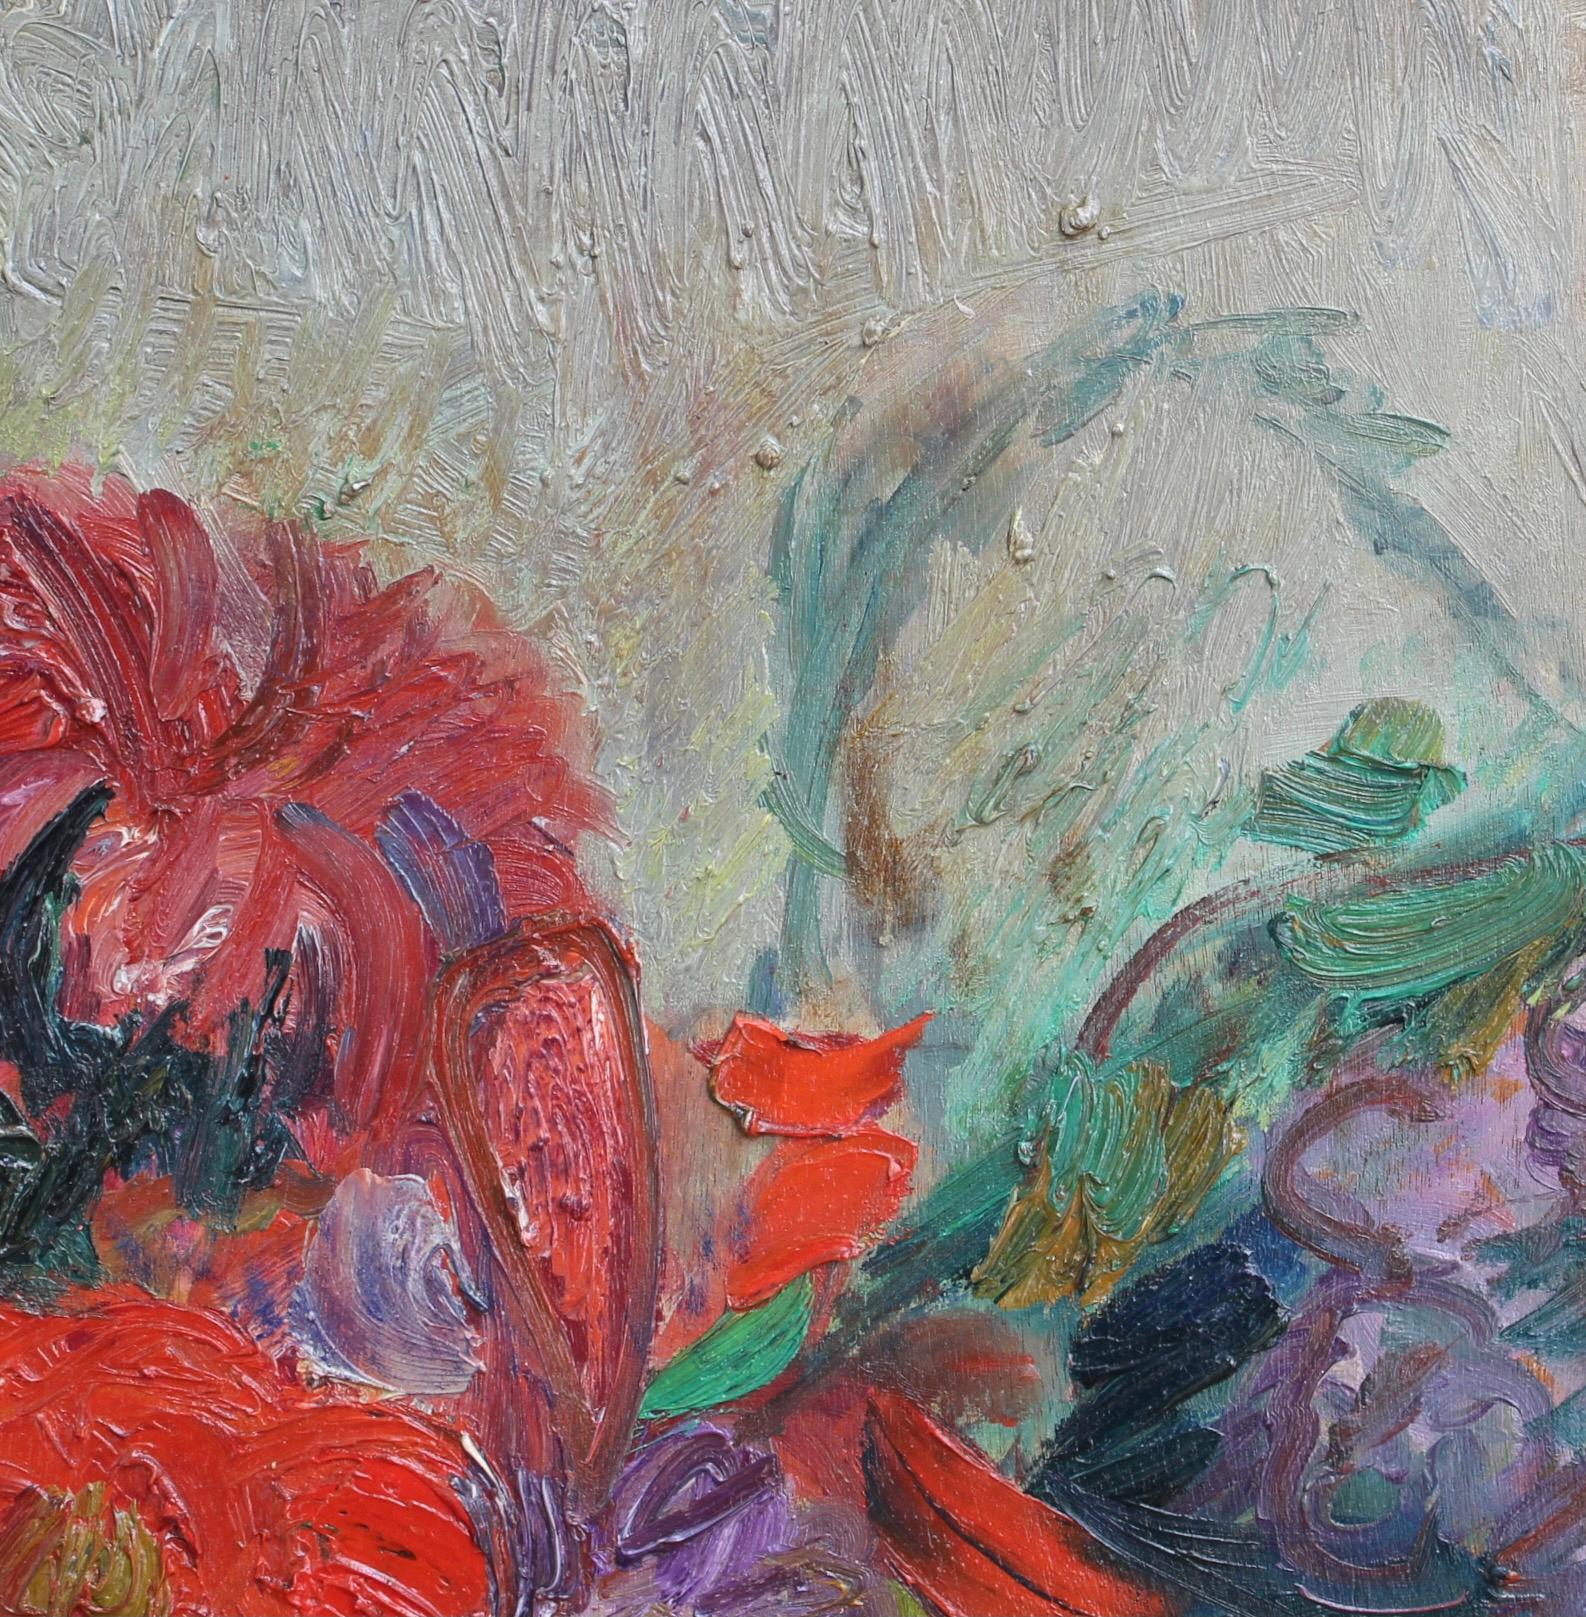 'Bouquet de Fleurs', oil on board, by Louis Toncini (1982). Painted towards the end of his career, this piece belongs to that part of his body of work which was lighthearted, optimistic and pleasing. It is a stunning still life characterised by